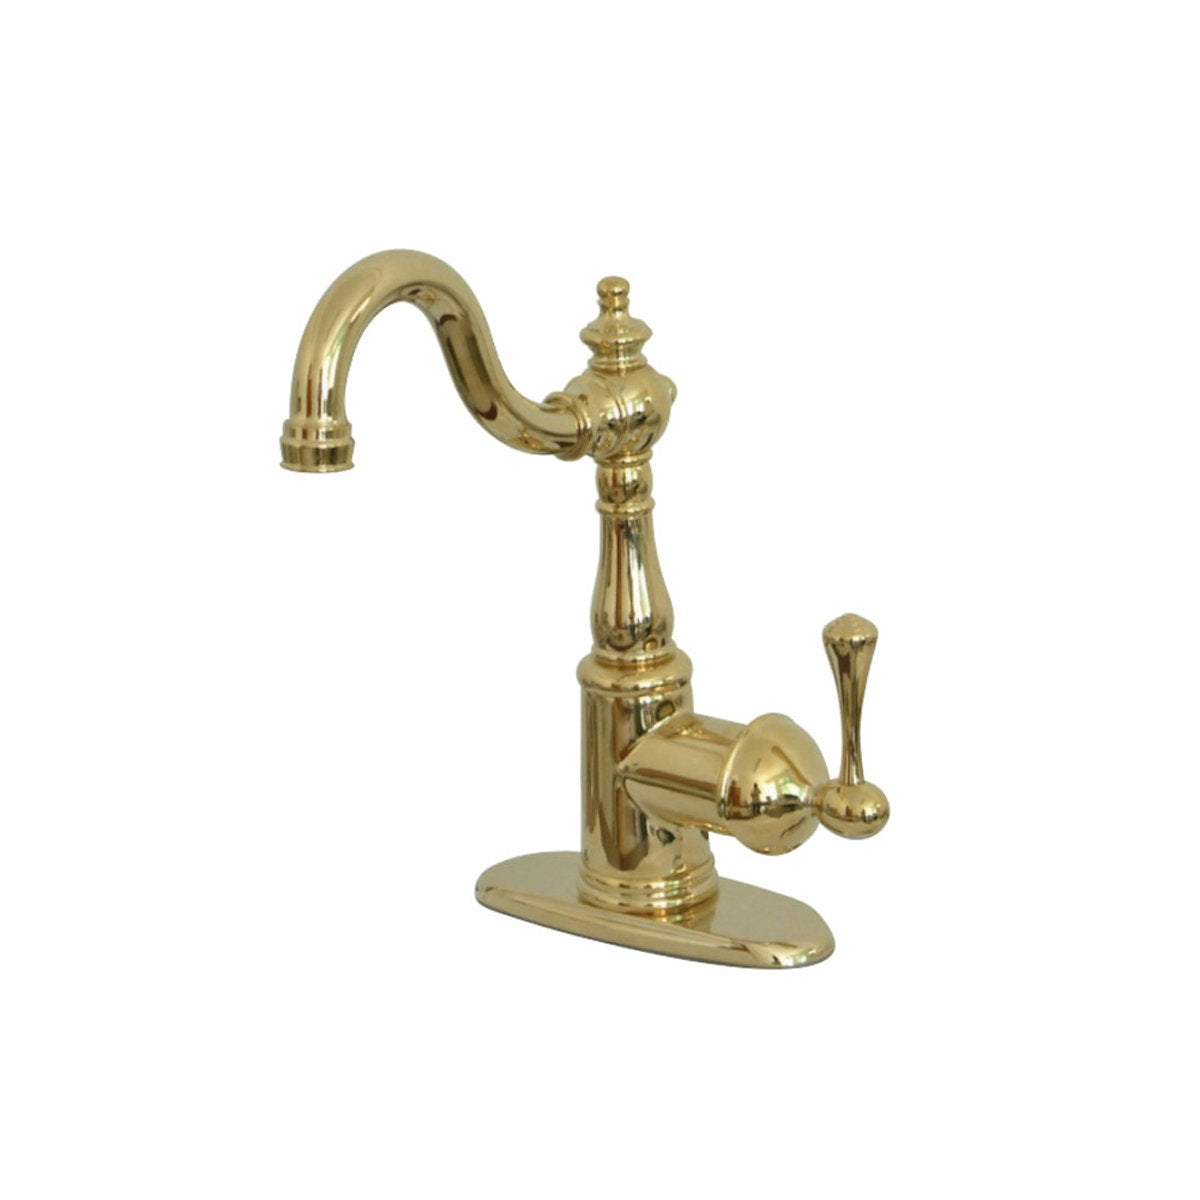 Kingston Brass English Vintage Bar Faucet with Cover Plate